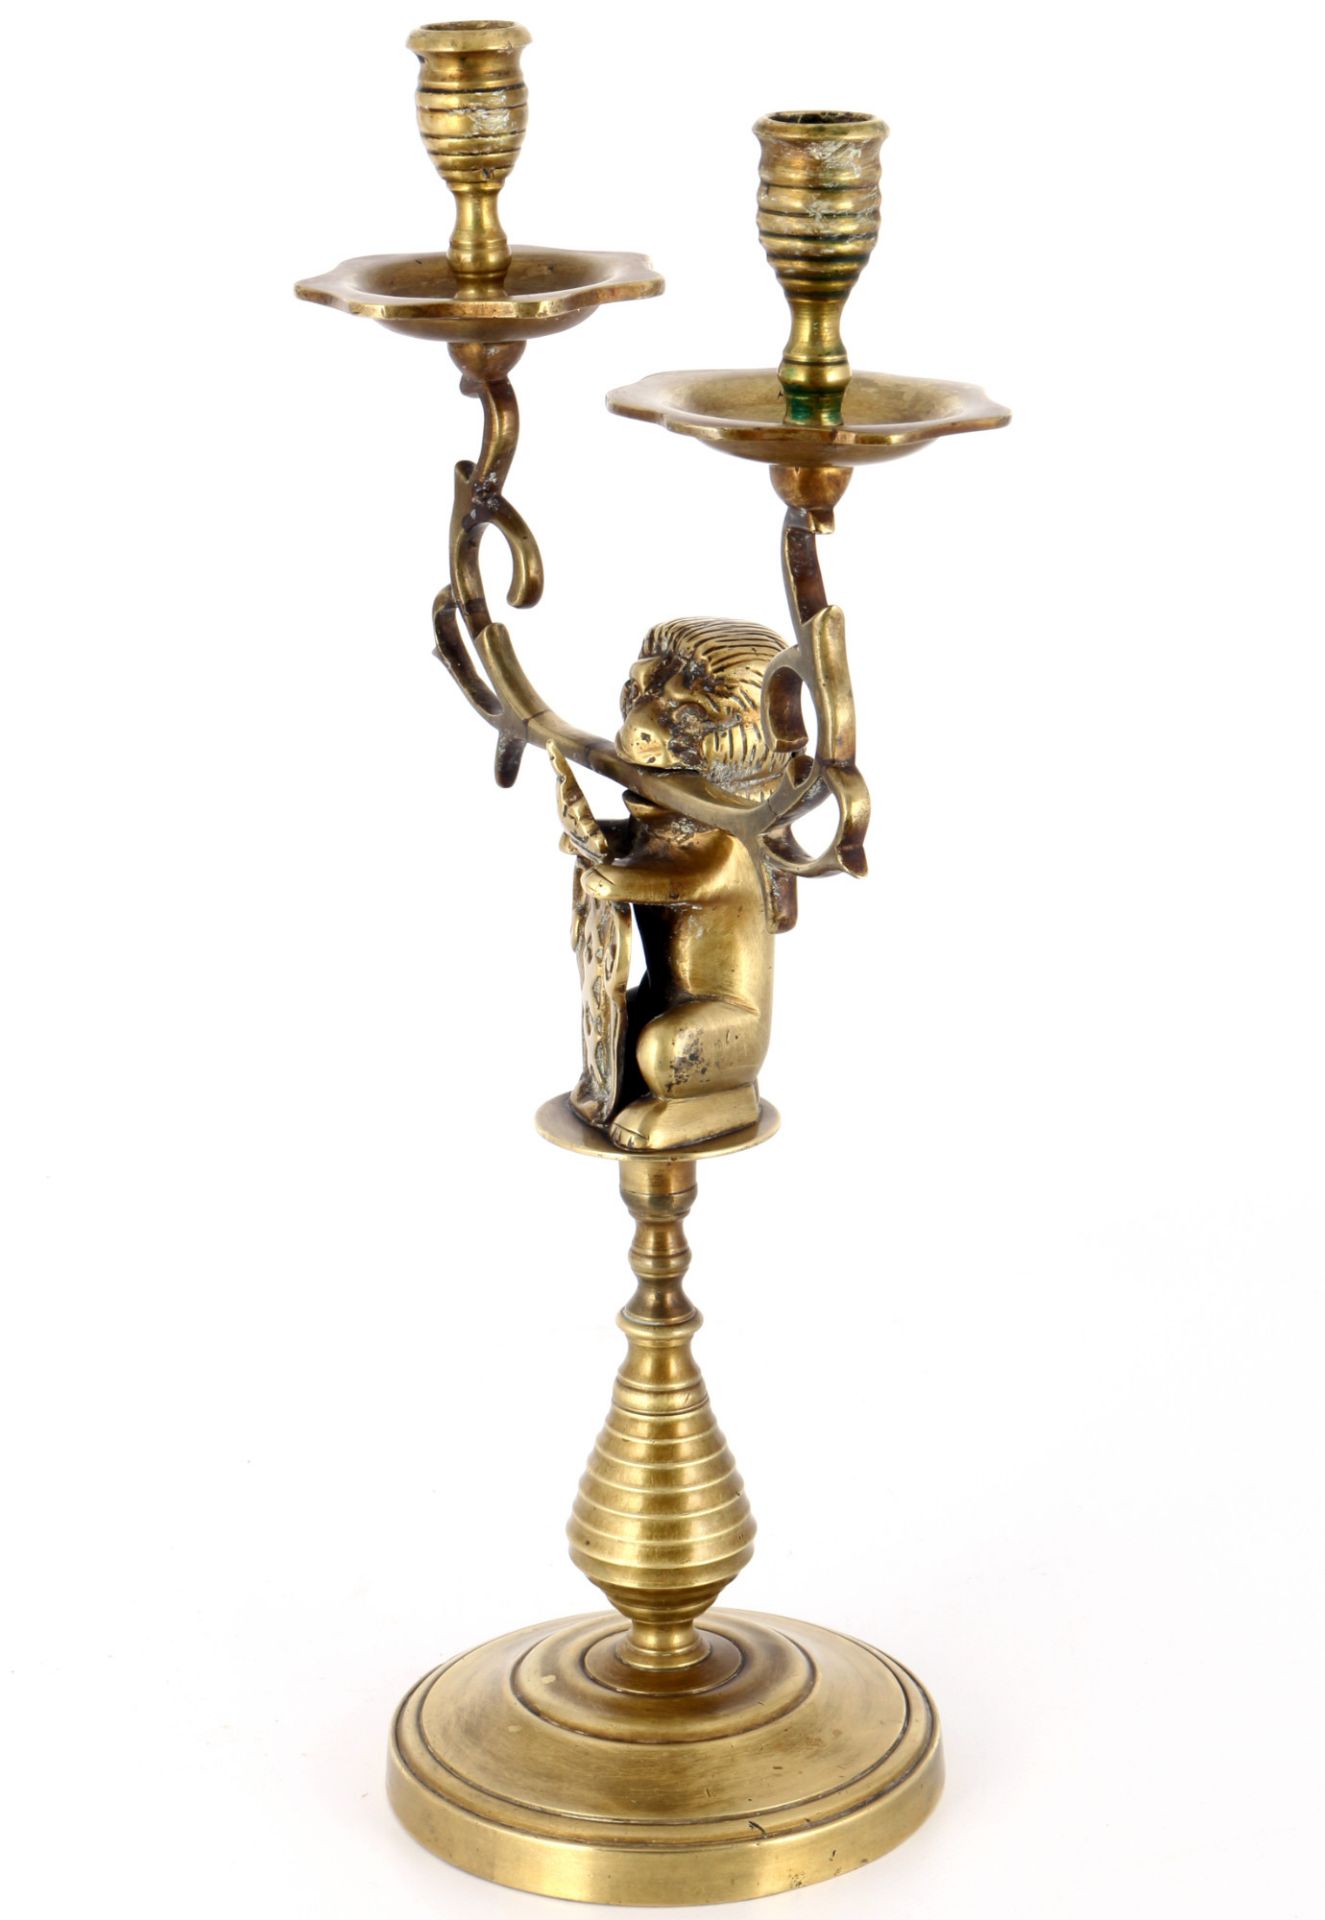 Amsterdam brass candlestick with city coat of arms around 1930, Messingleuchter mit Stadtwappen - Image 2 of 6